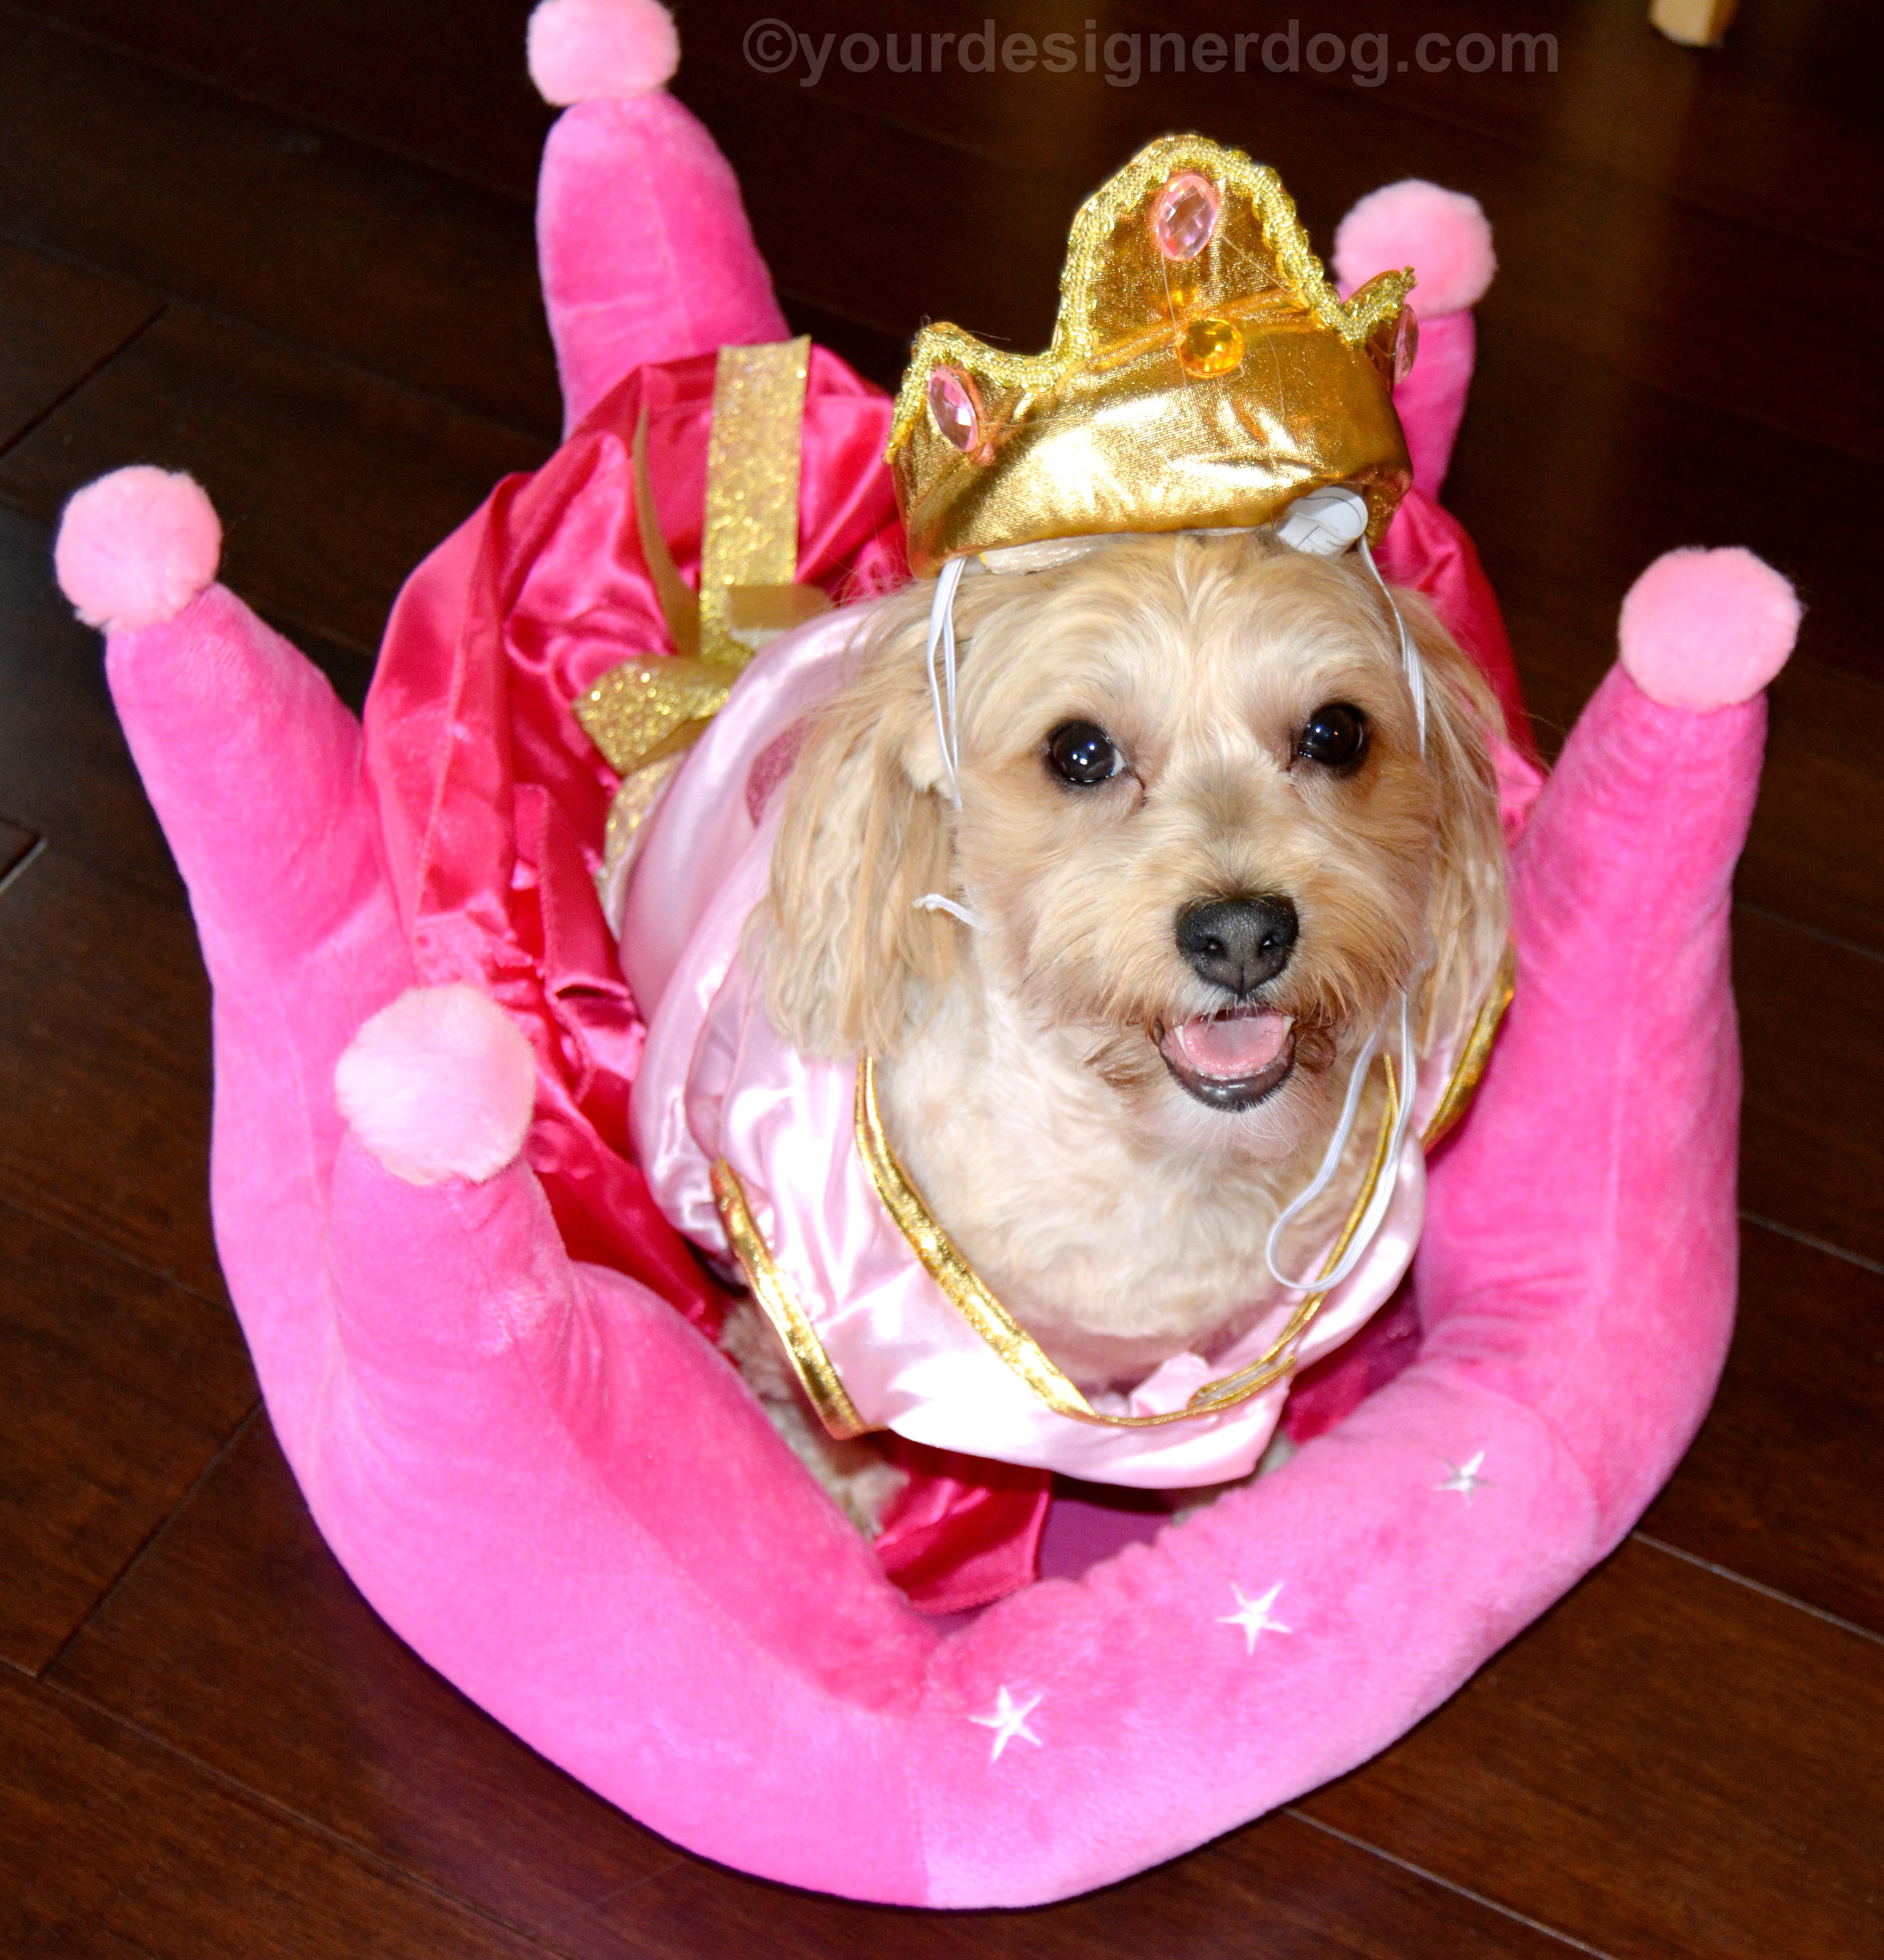 dogs, designer dogs, yorkipoo, yorkie poo, queen, royalty, dog costume, crown, dog bed